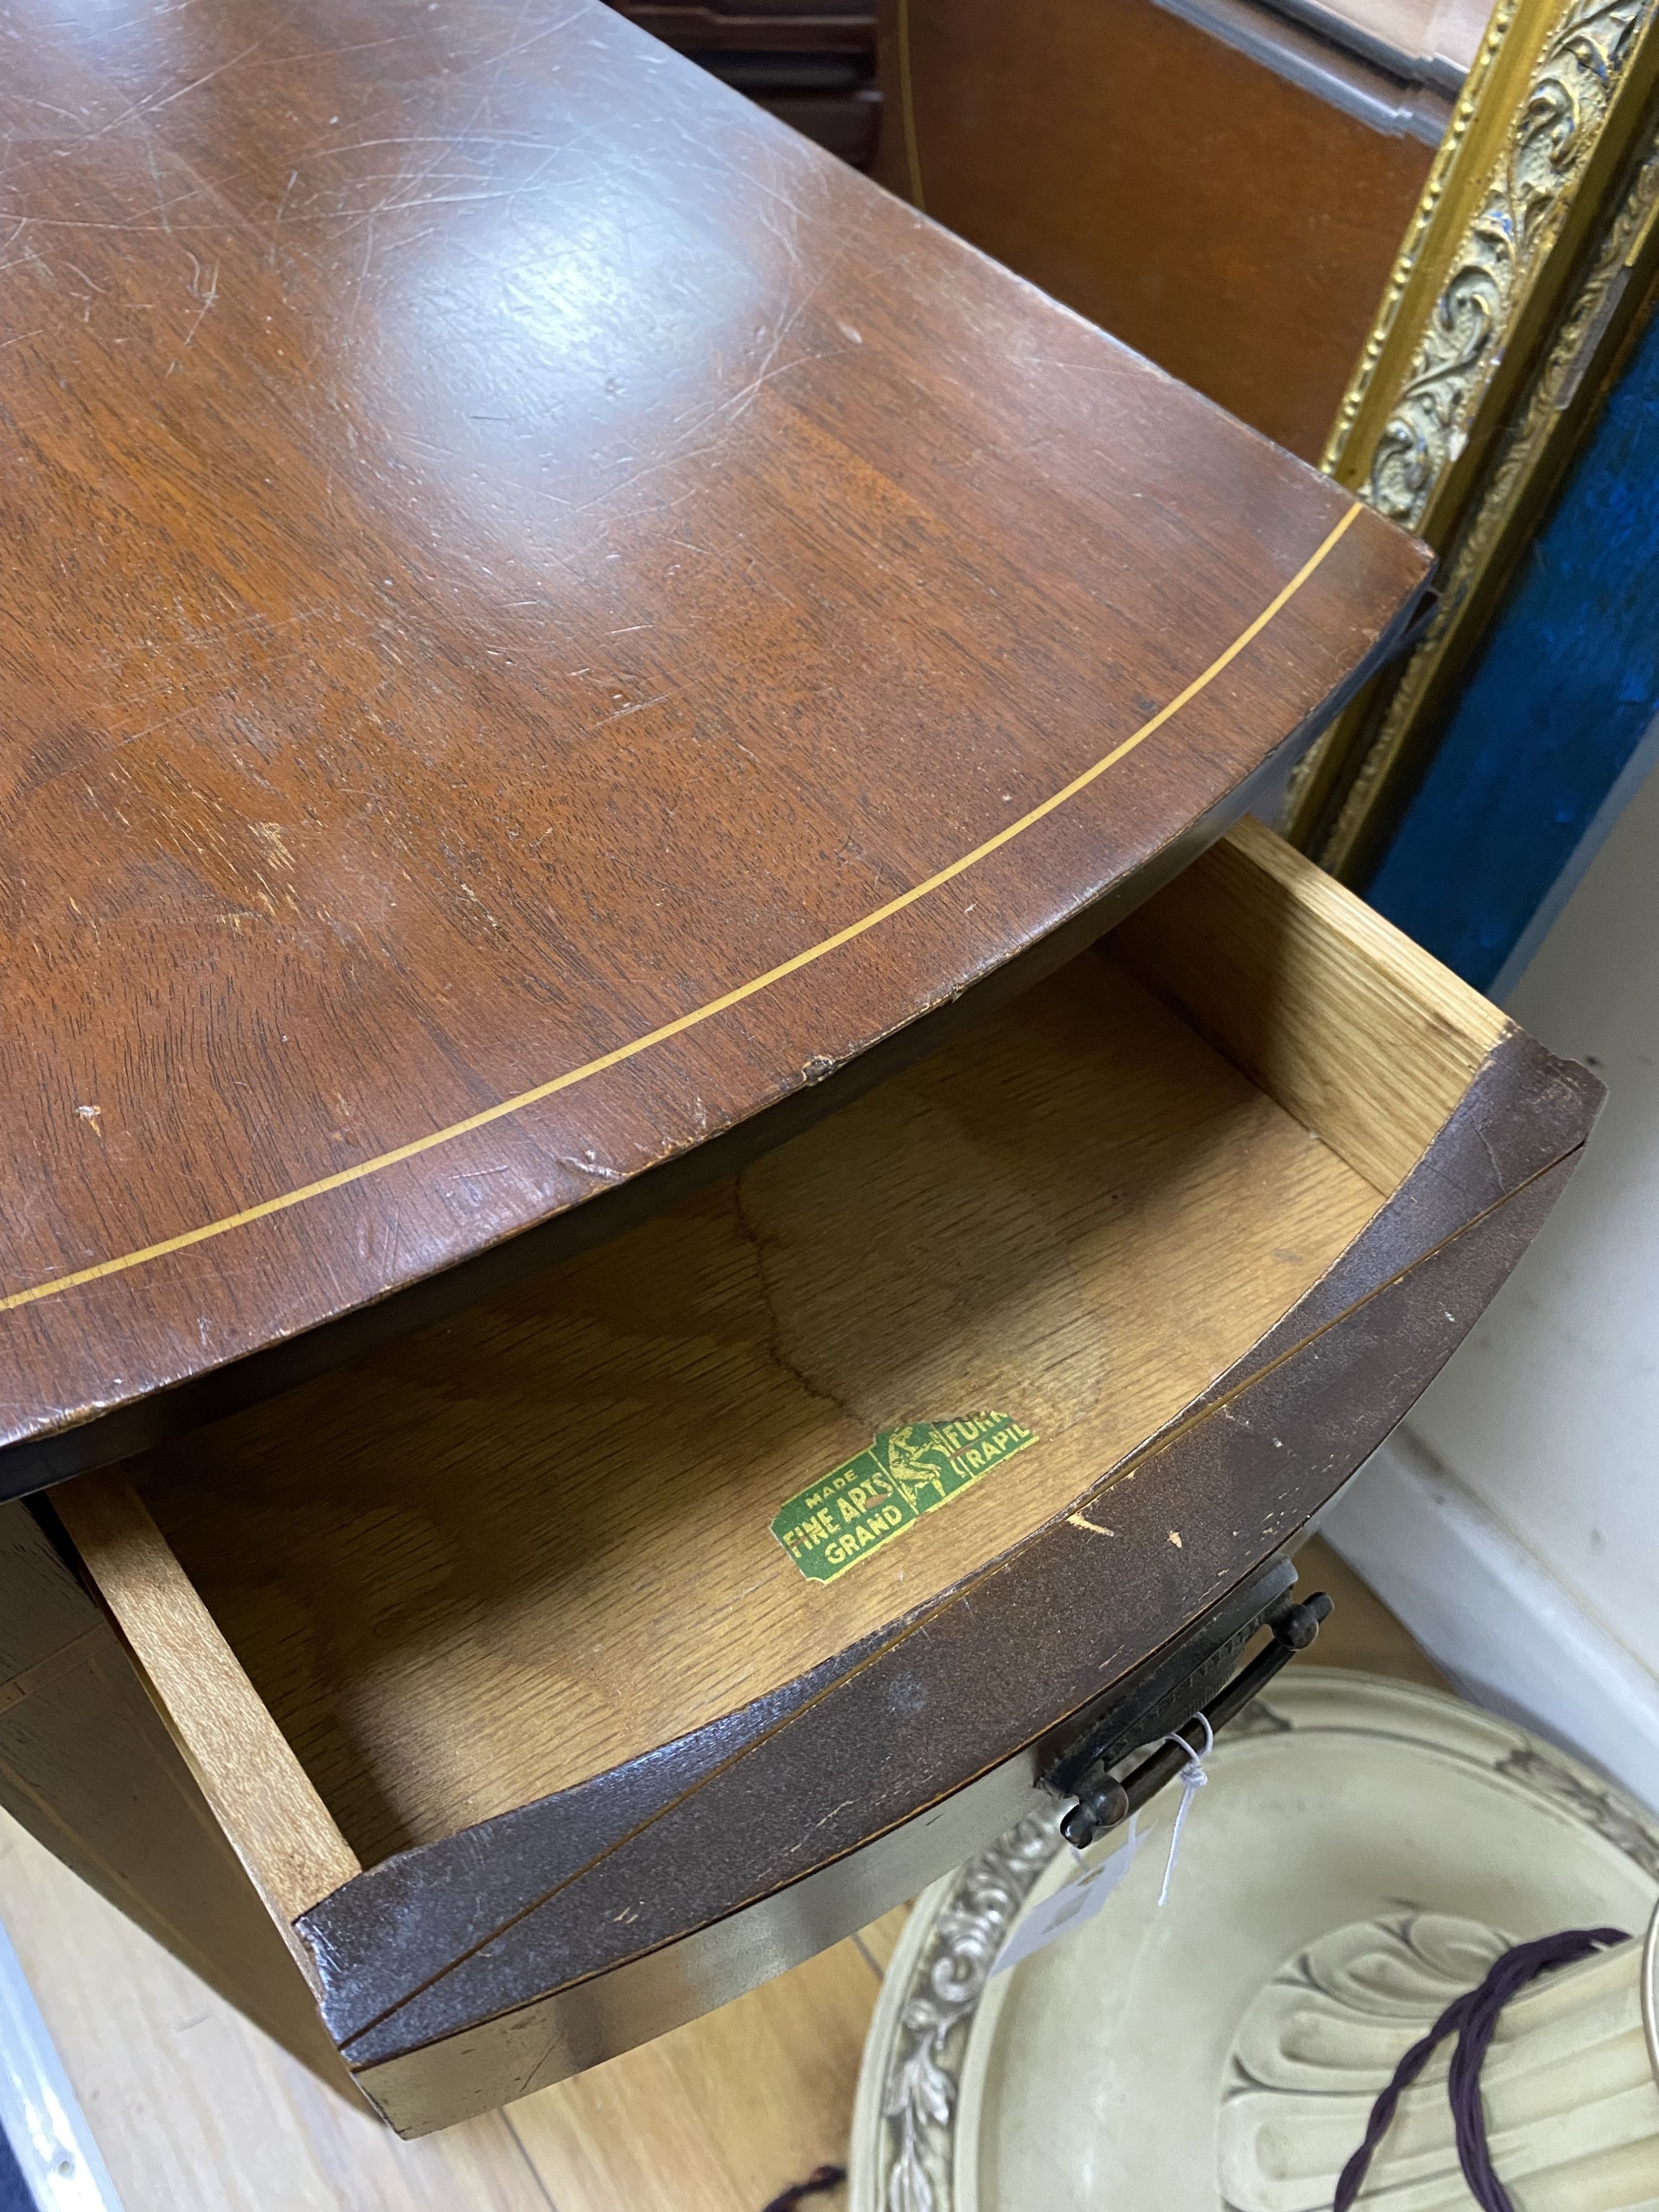 A small inlaid mahogany oval Pembroke table, width 52cm, depth 37cm, height 64cm